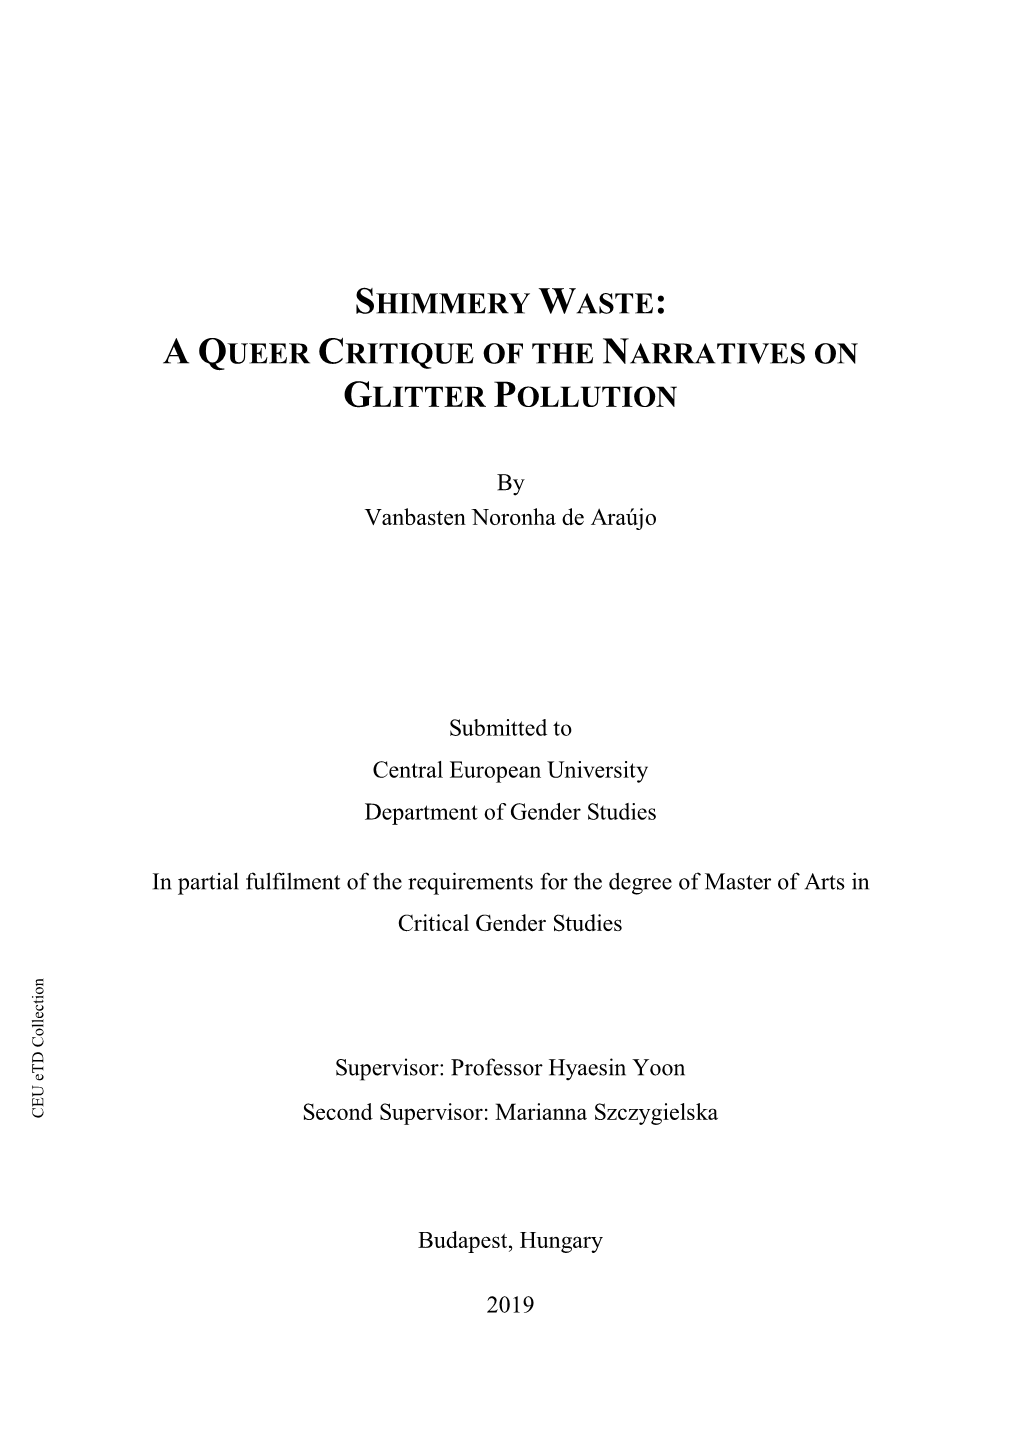 Shimmery Waste: a Queer Critique of the Narratives on Glitter Pollution